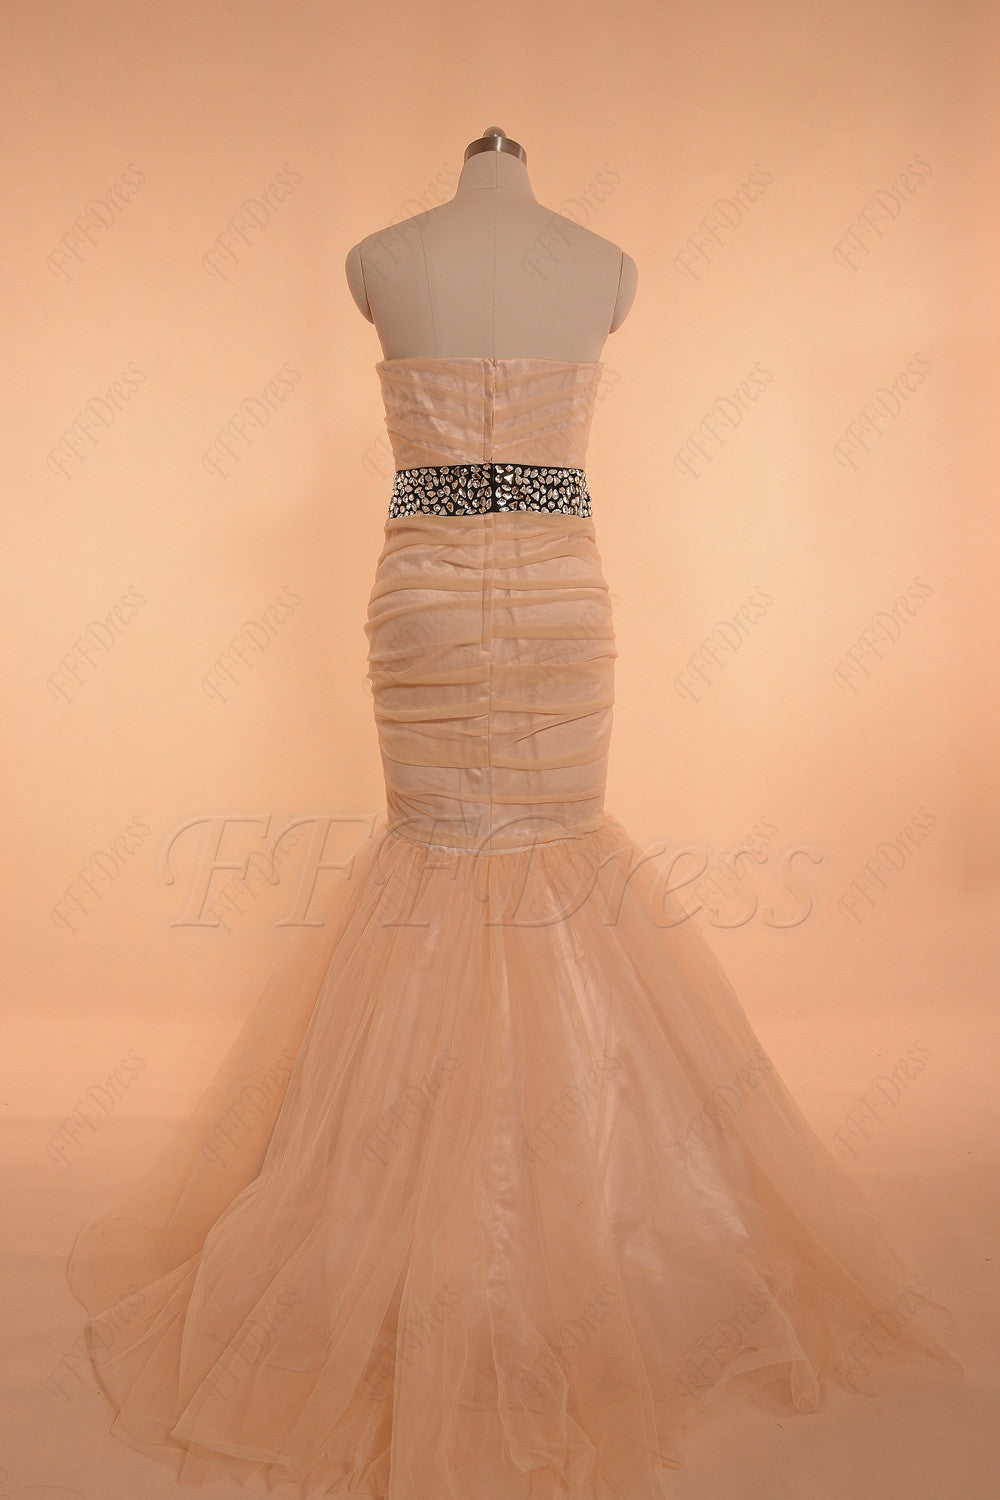 Mermaid champagne prom dresses with crystal sparkly waist